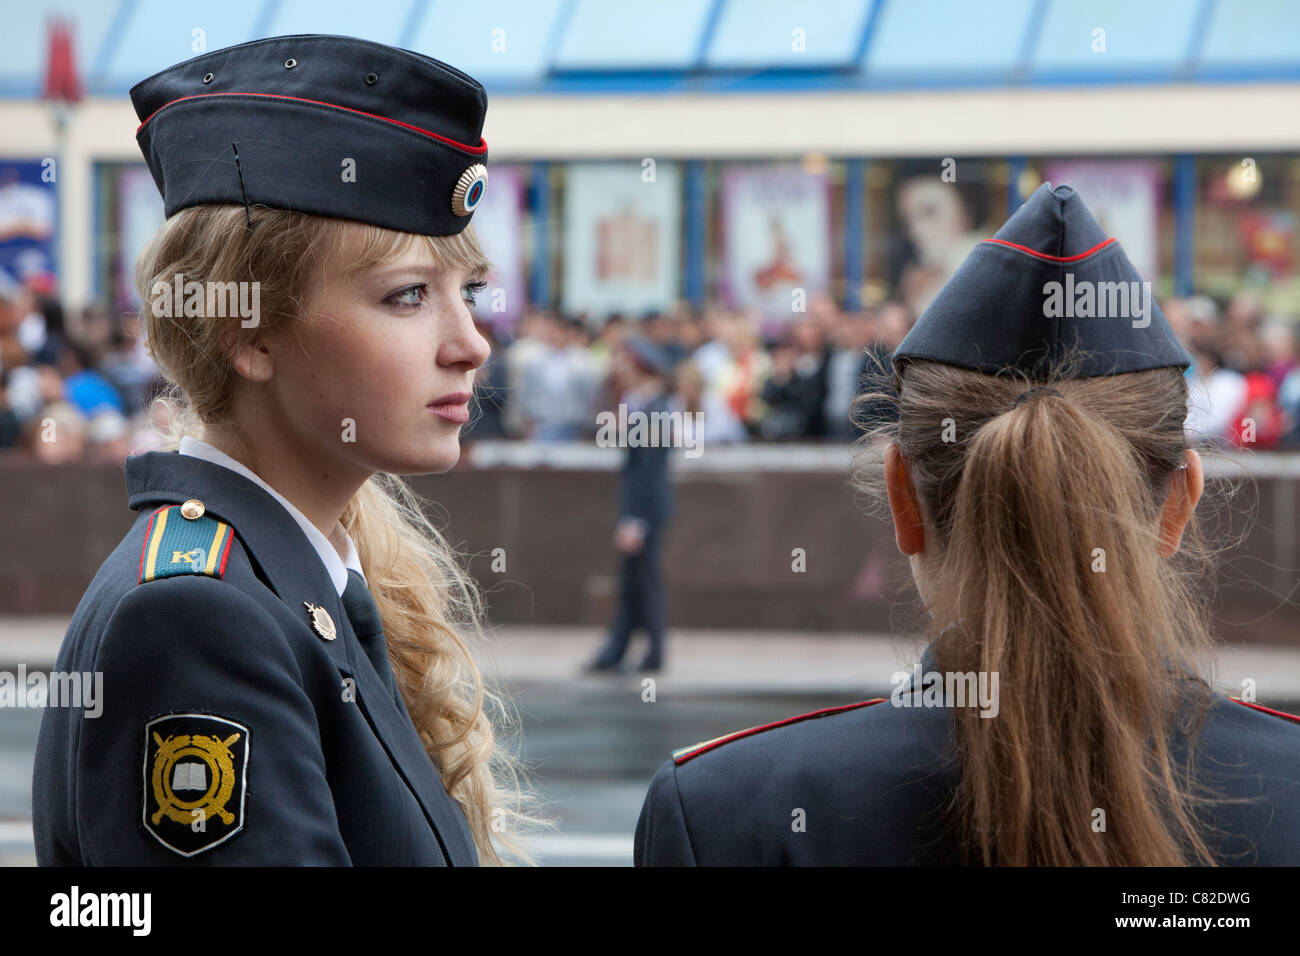 two-female-police-cadets-on-victory-day-at-tverskaya-street-in-moscow-C82DWG.jpg